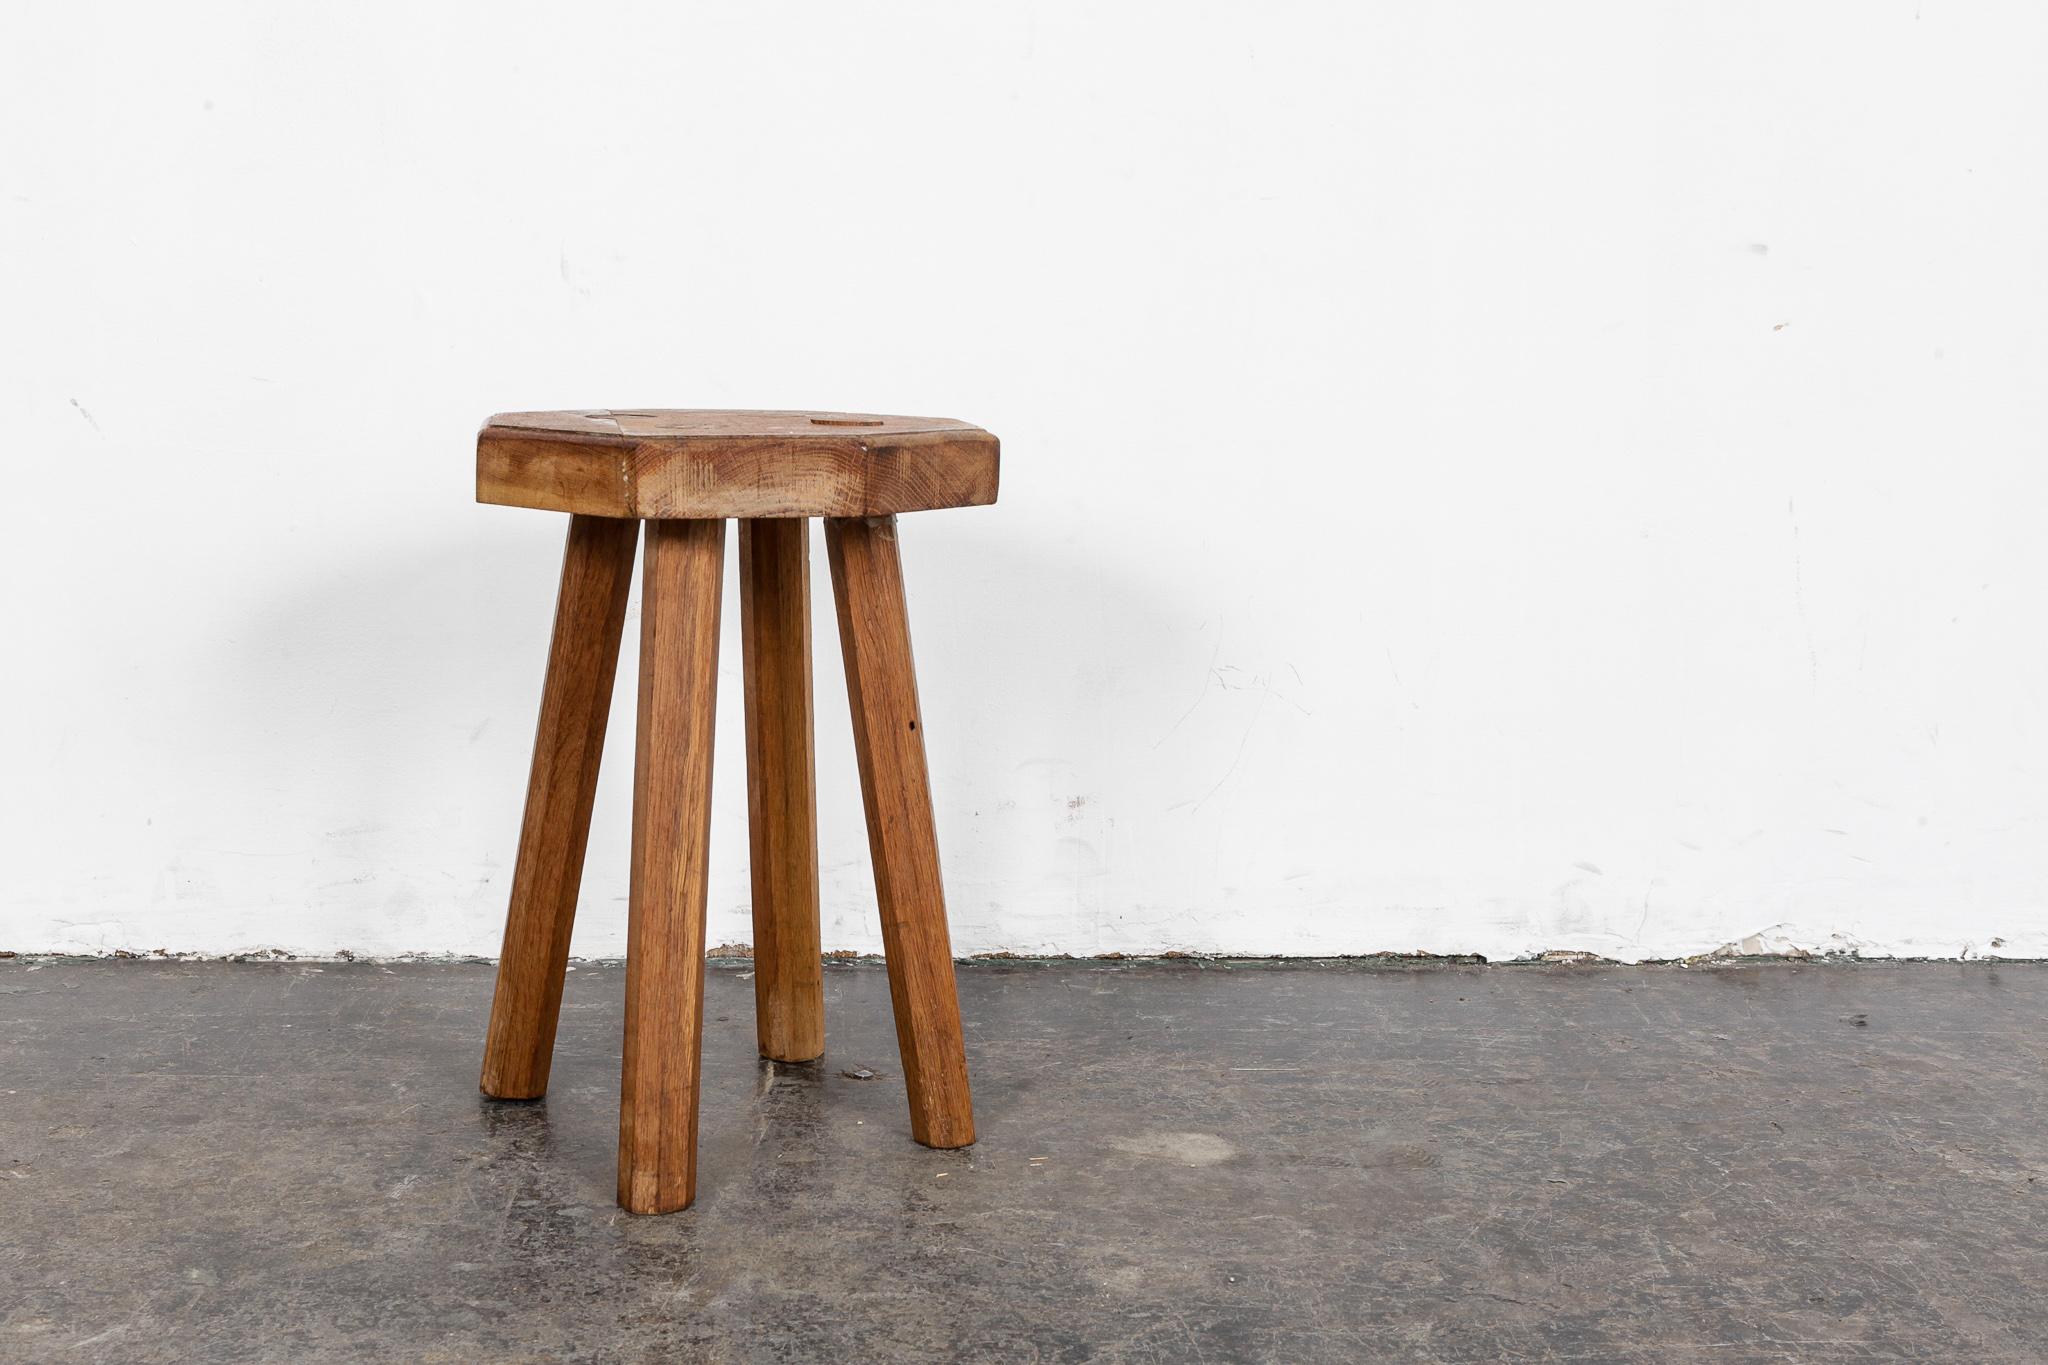 Rustic octagonal top solid oak 4 legged milking stool with exposed leg joinery in the stool seat, Sweden, 1930s (estimated). In original vintage condition.